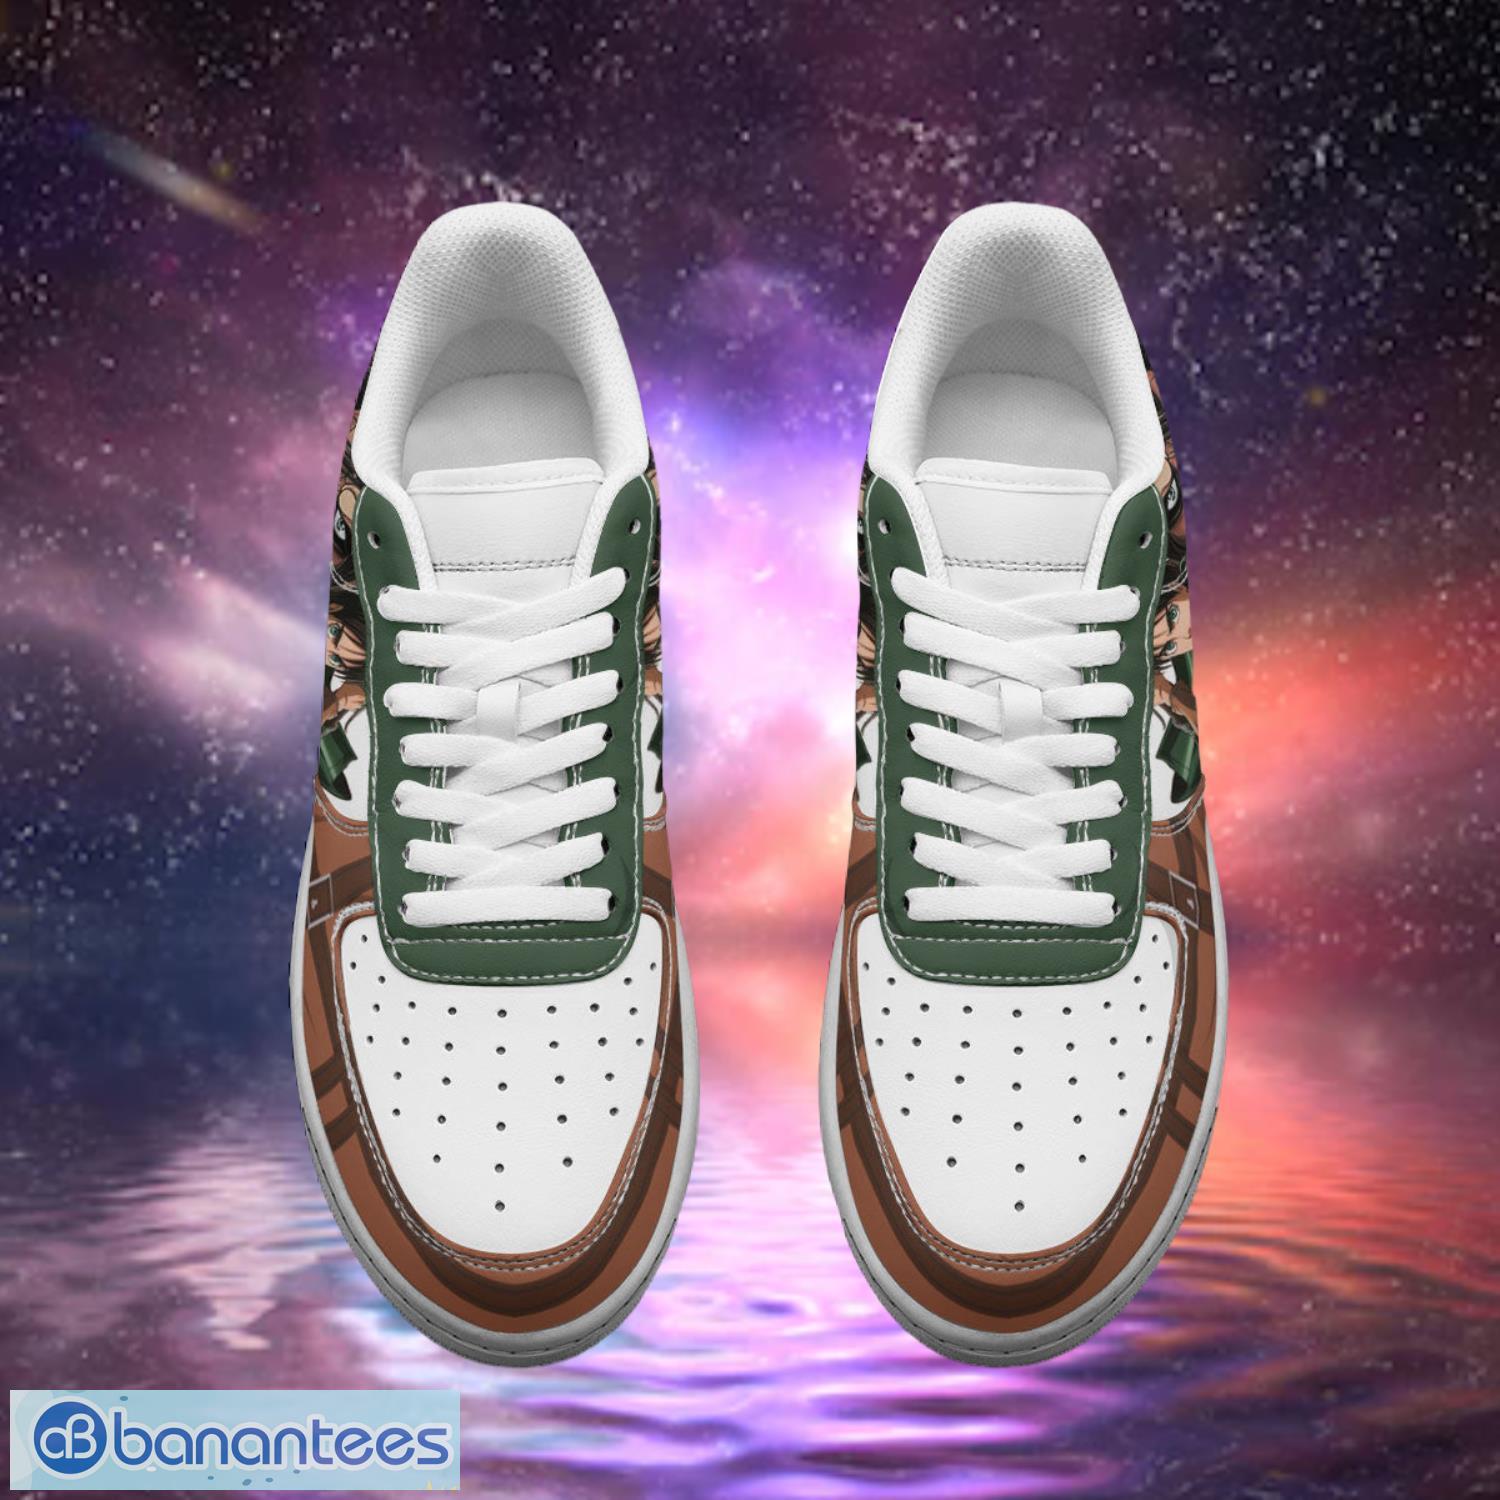 Attack On Titan Eren Yeager Air Sneakers Custom Anime Shoes Product Photo 2